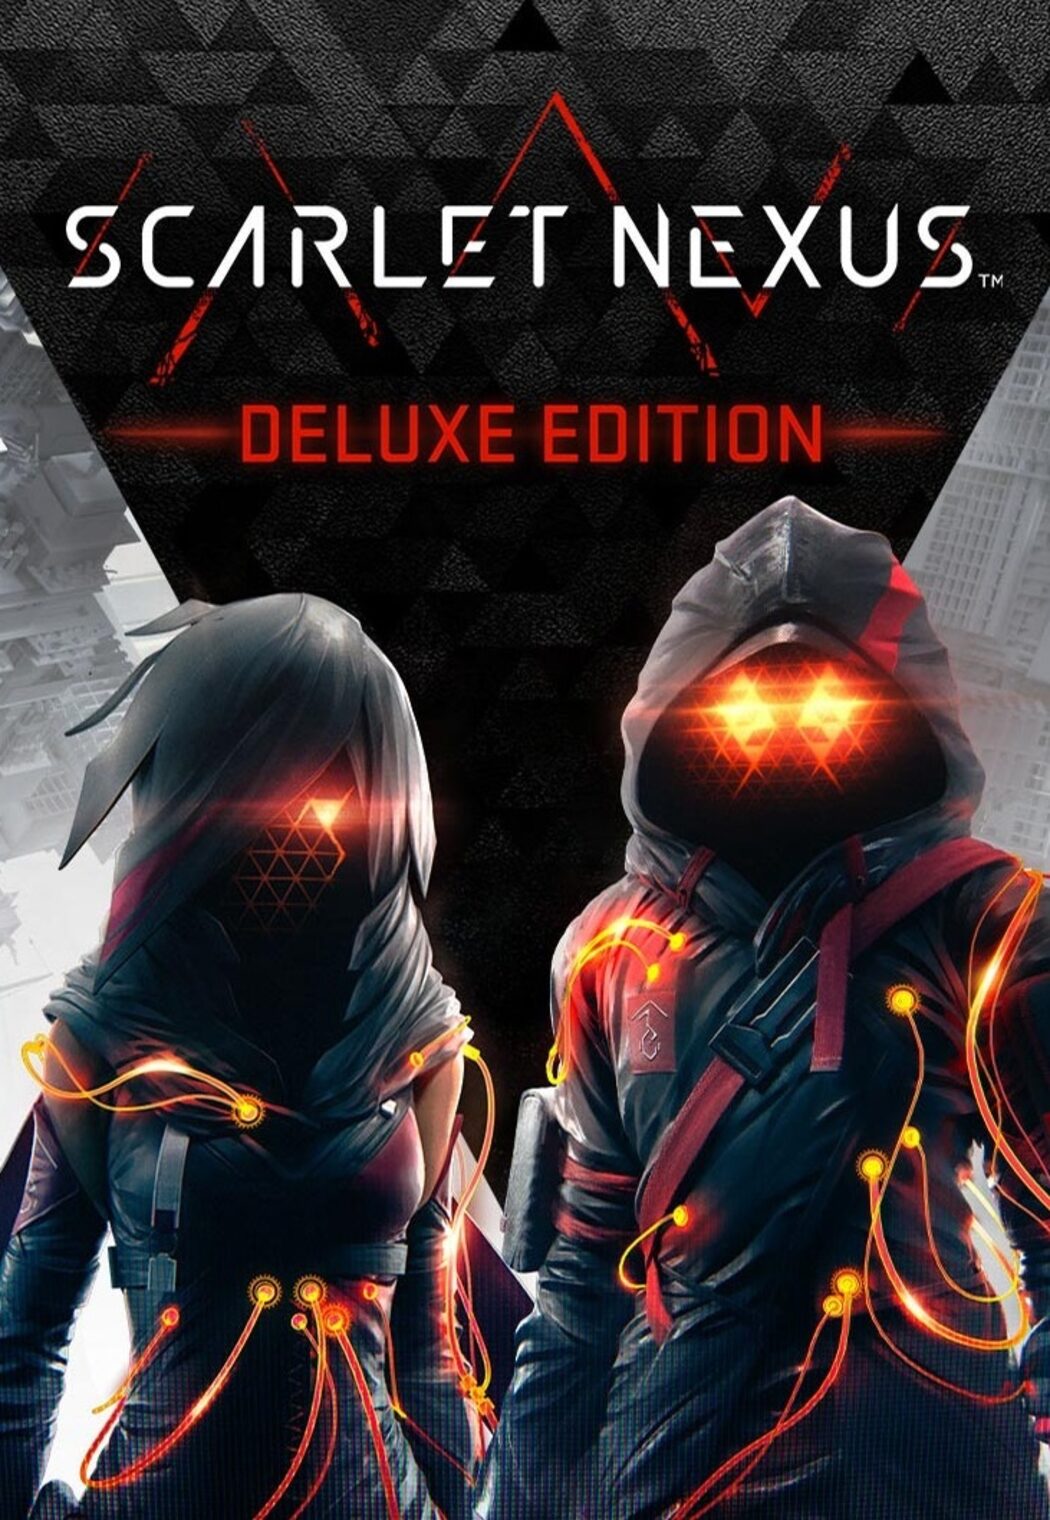 SCARLET NEXUS PC Steam Key GLOBAL FAST DELIVERY! RPG ACTION GAME anime  sci-fi